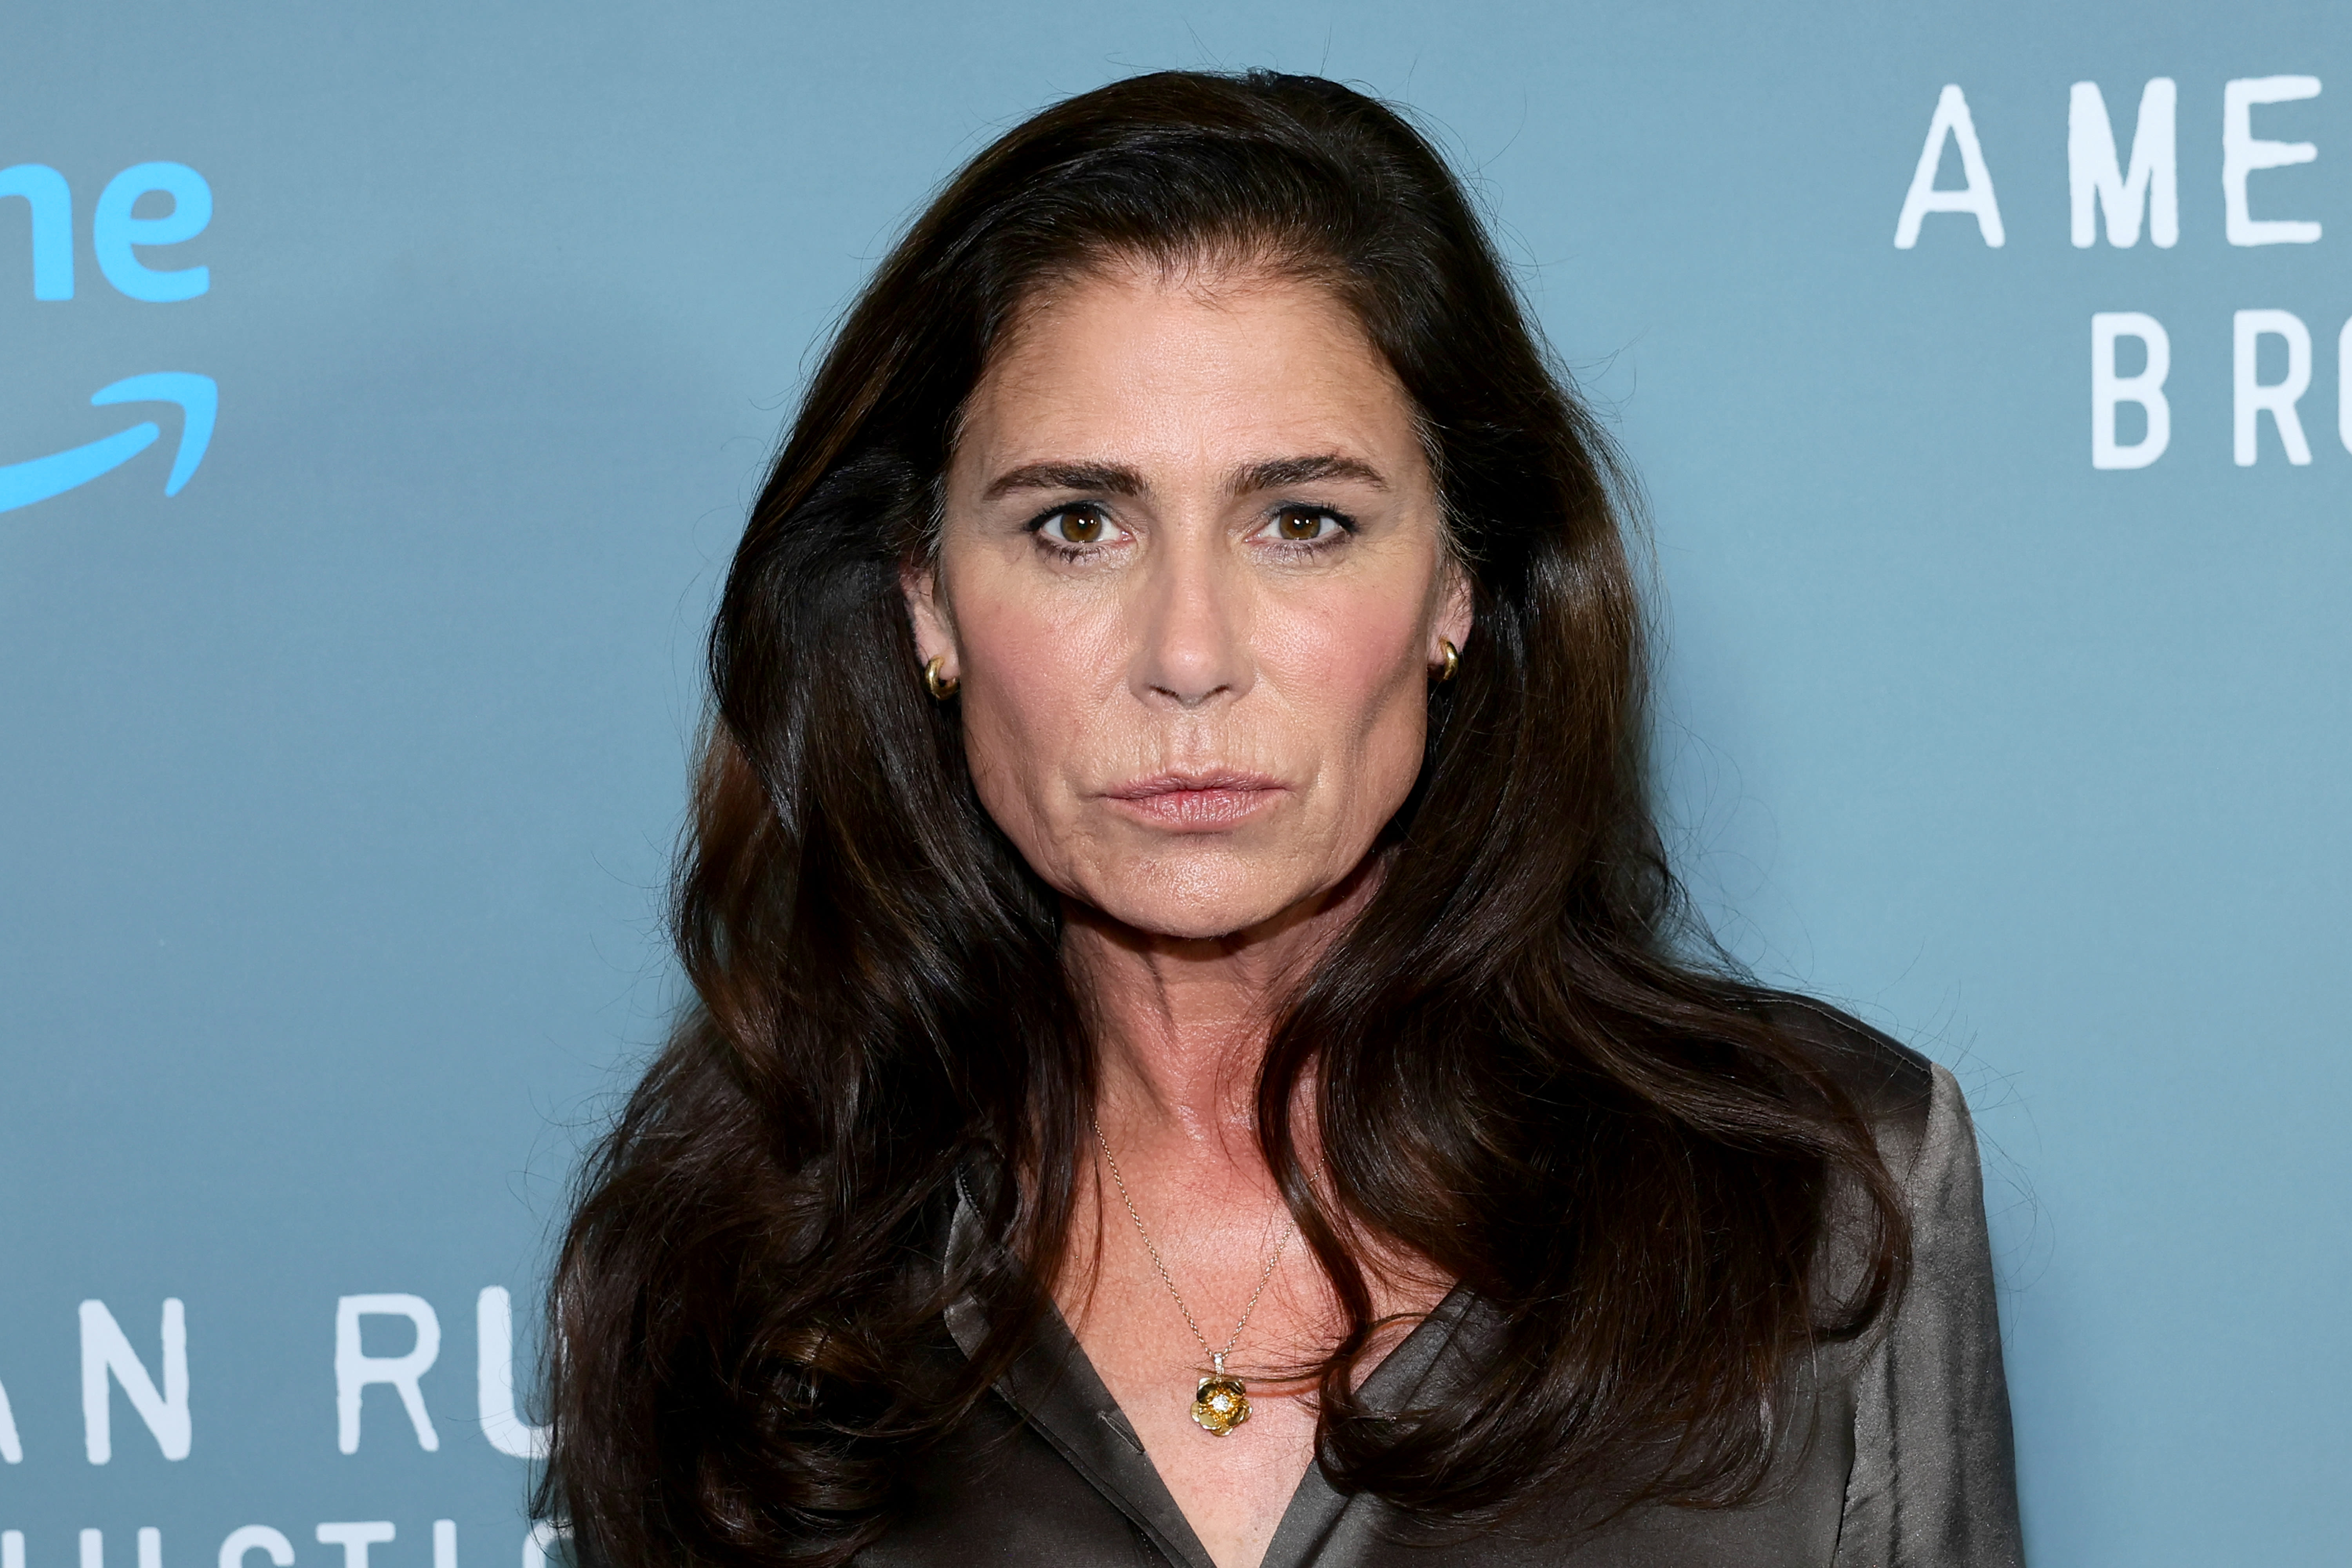 ‘Law & Order’ Casts Maura Tierney as a Lieutenant in Season 24